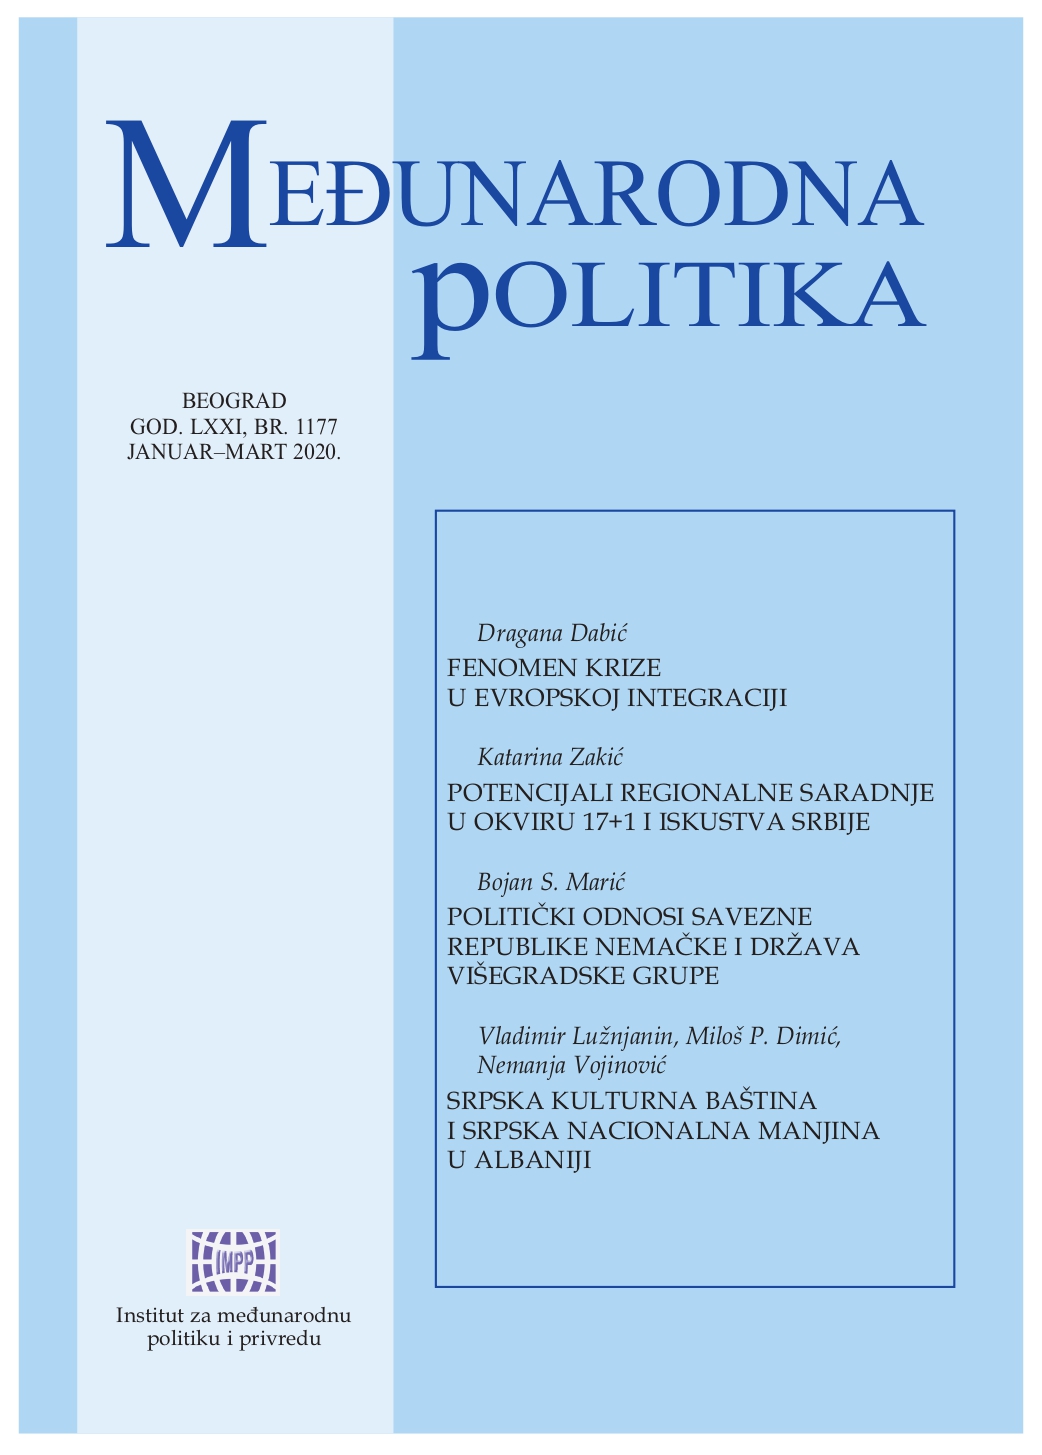 Serbian cultural heritage and the Serbian national minority in Albani Cover Image